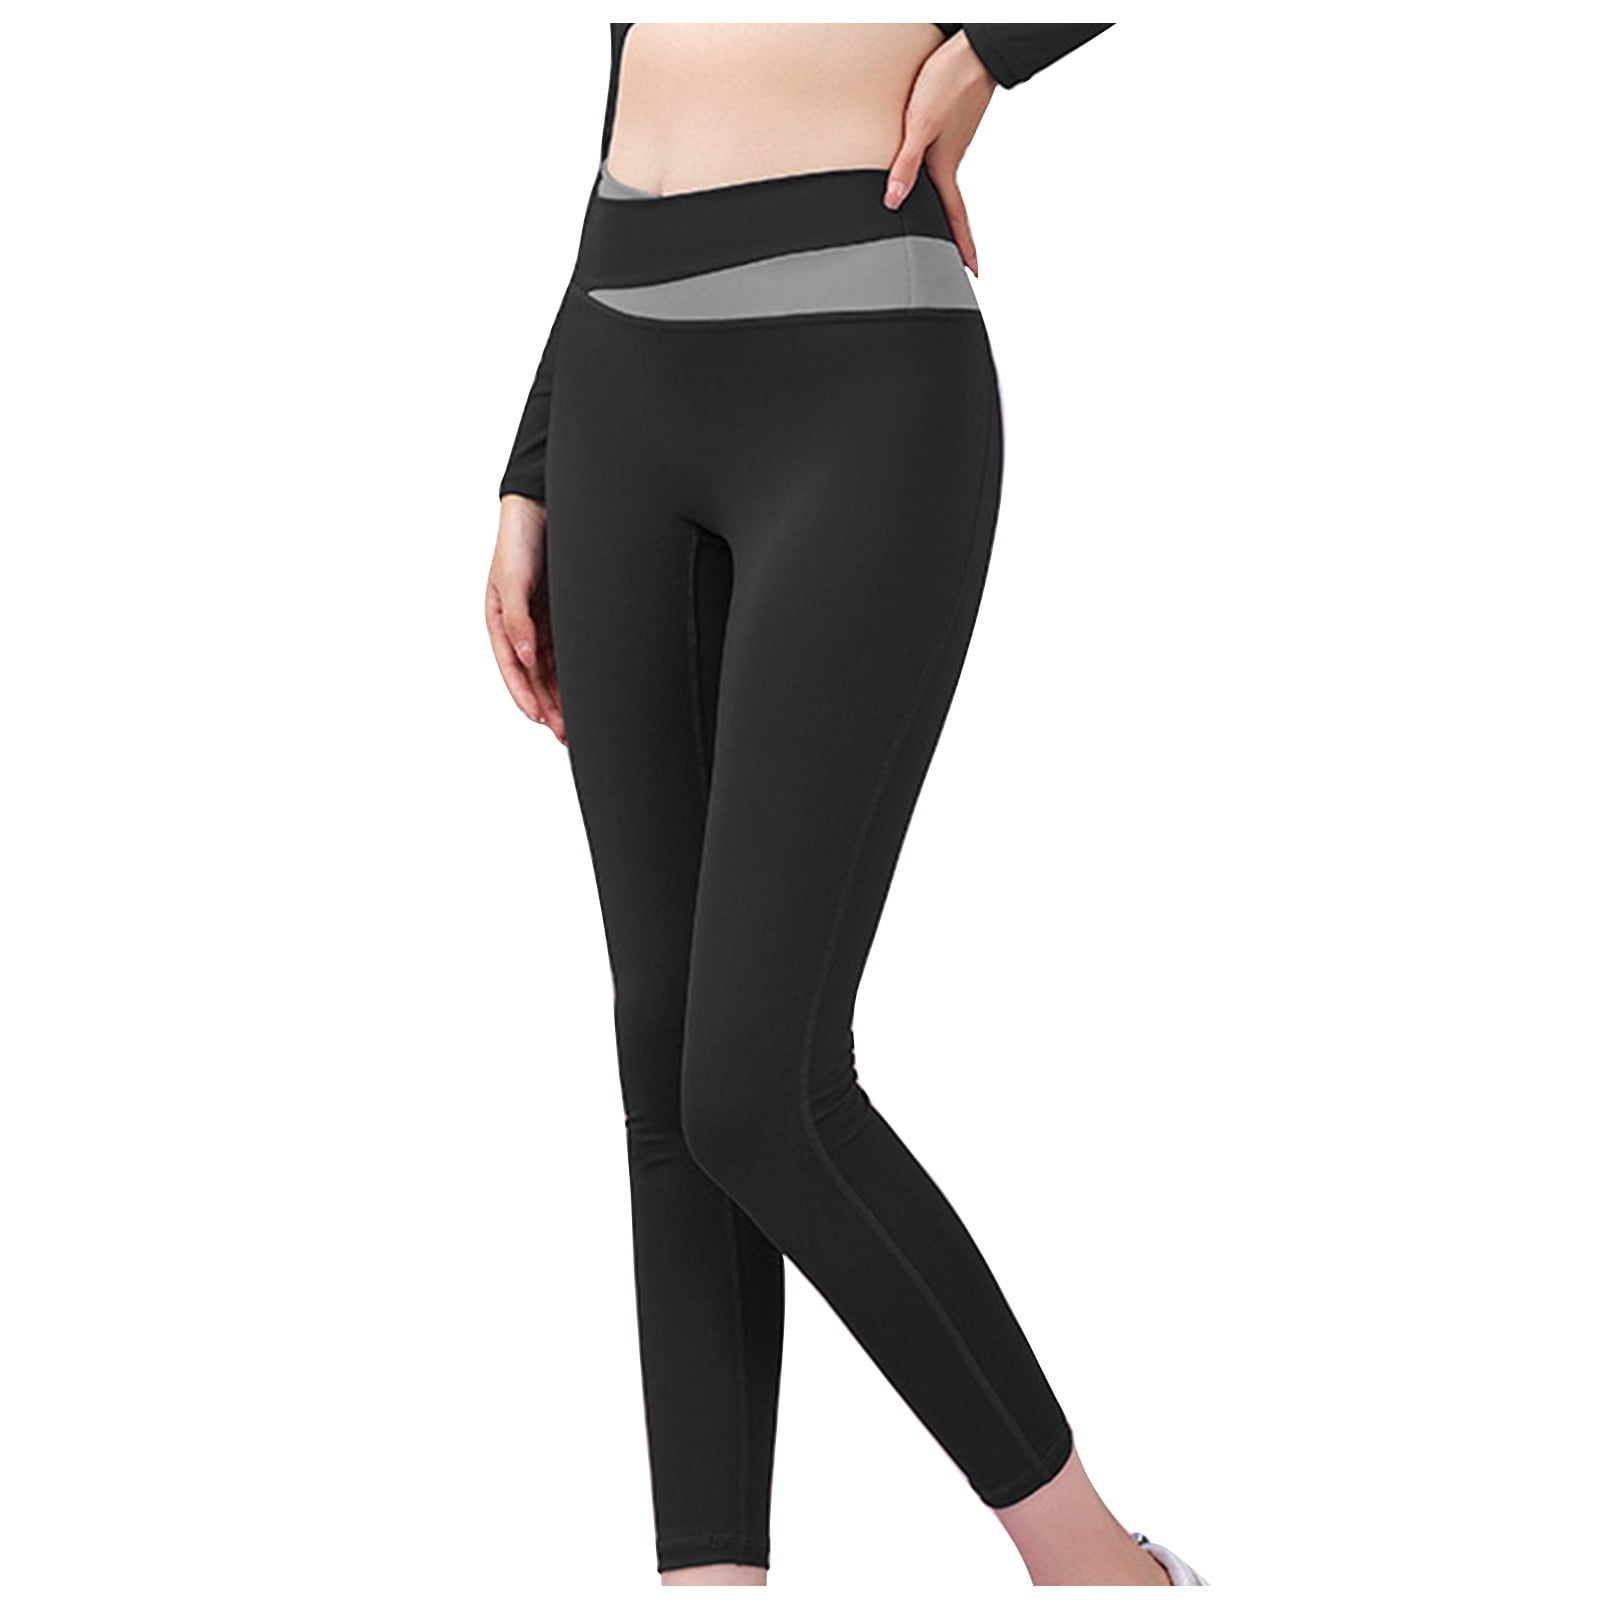 YWDJ Womens Leggings Workout Butt Lifting Gym Jumpsuits Long Length Sports  Yogalicious Crossover Utility Dressy Everyday Soft Color Colored Cross  Waist Fitness Tight Black Leggings Sweatpants Black XL 